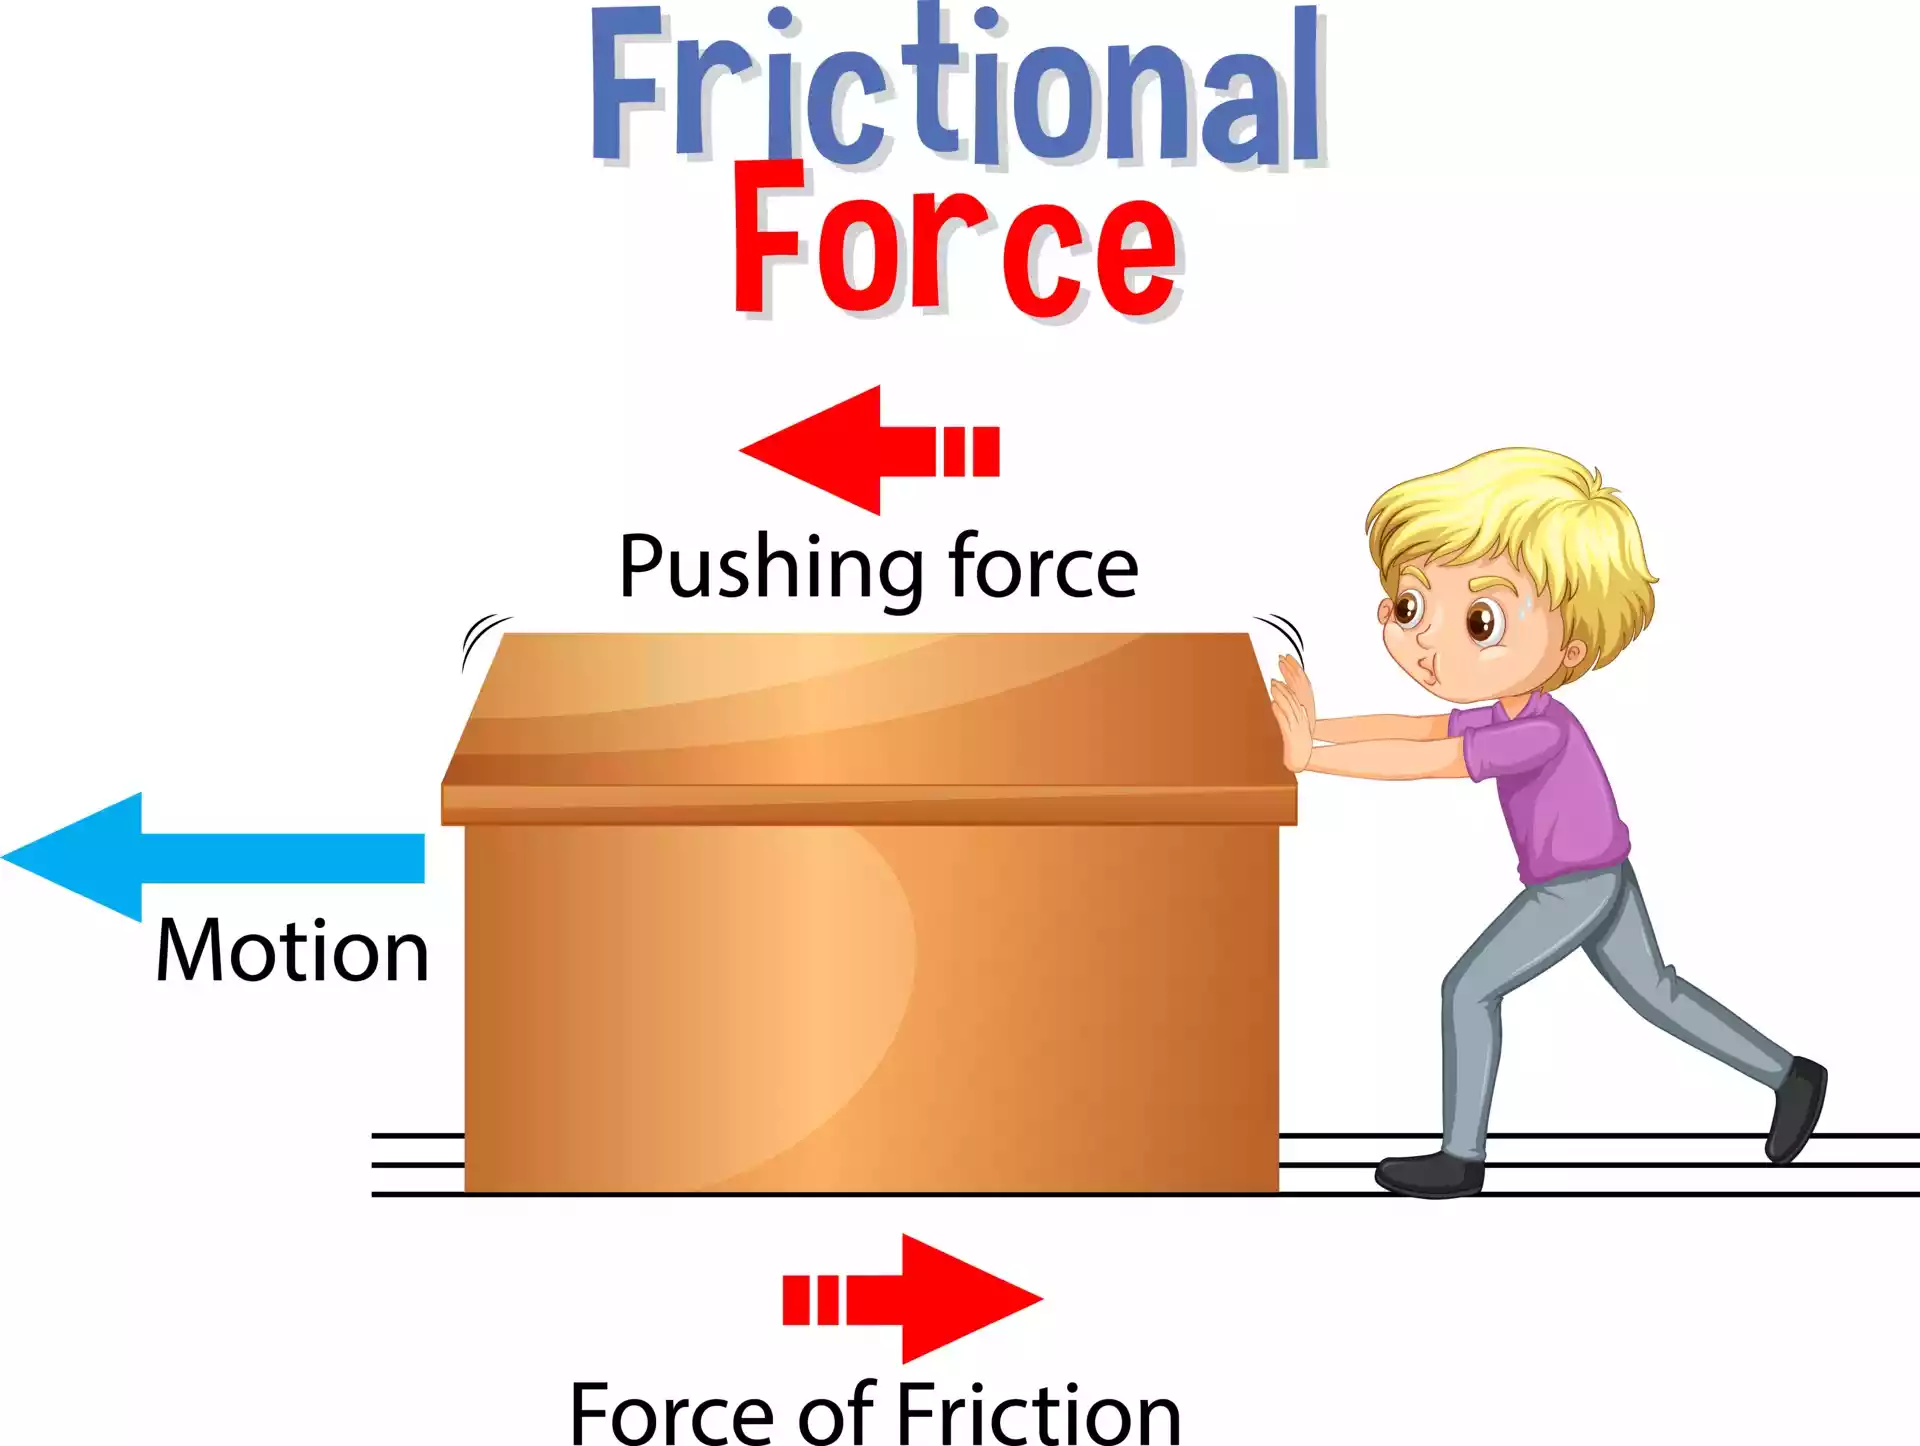 5 Advantages and 5 Disadvantages of Friction